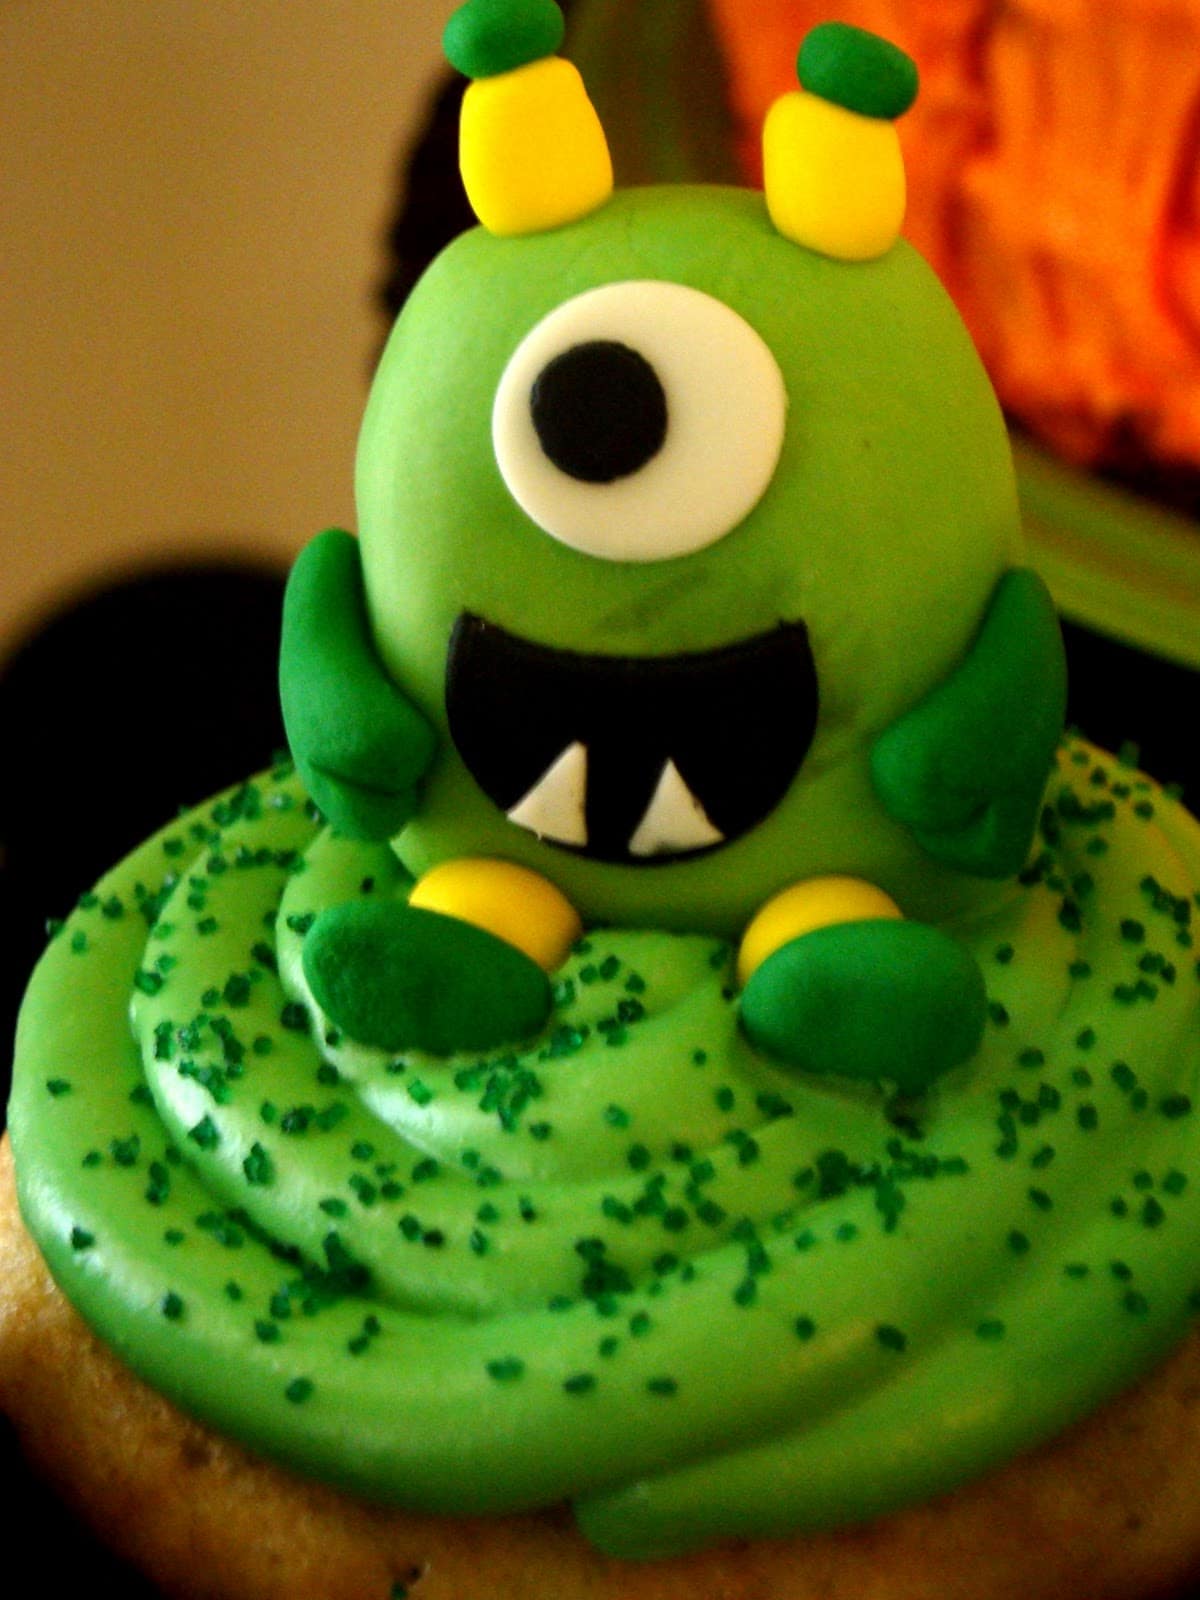 Monster Party + Monster Tutorial including lots of ideas and tutorials to have the perfect monster party!! { lilluna.com }